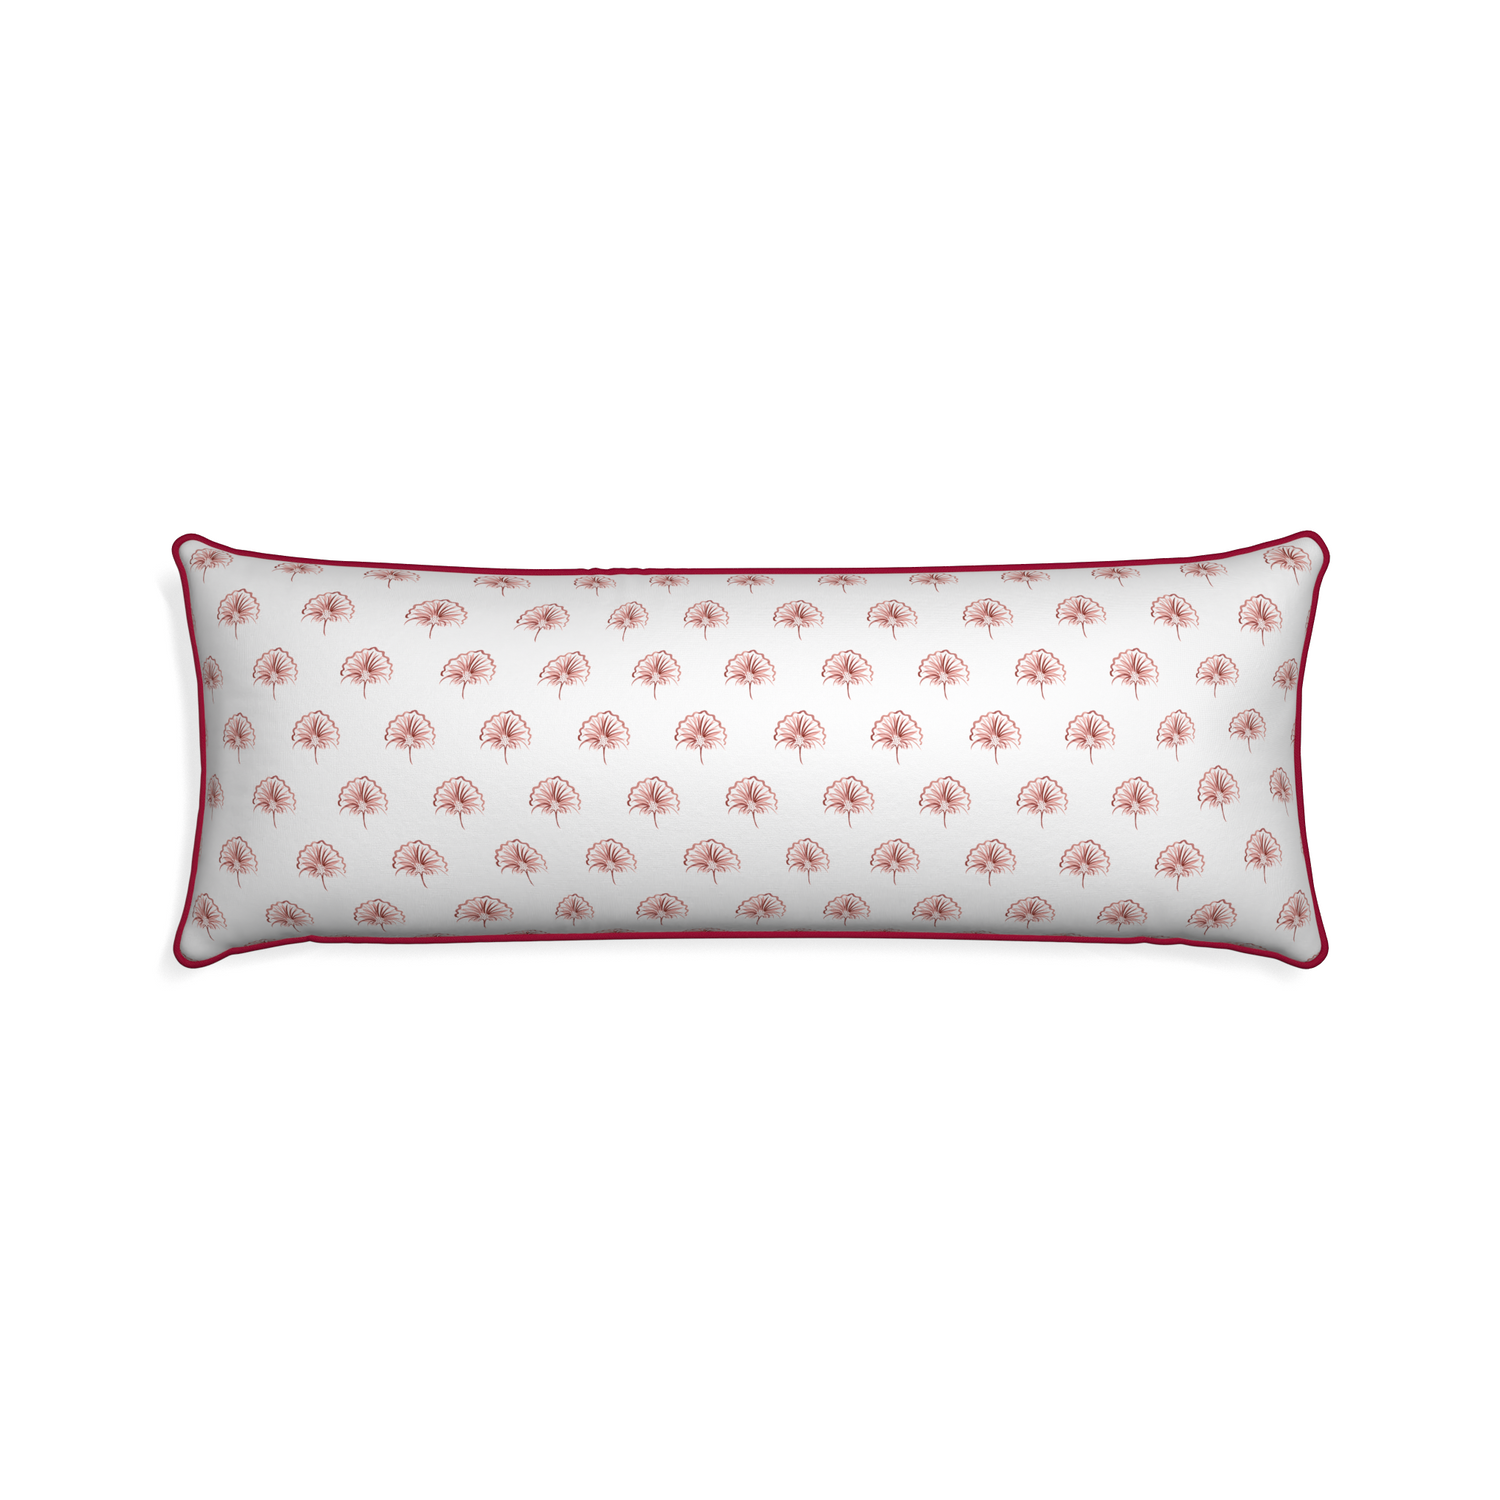 Xl-lumbar penelope rose custom floral pinkpillow with raspberry piping on white background